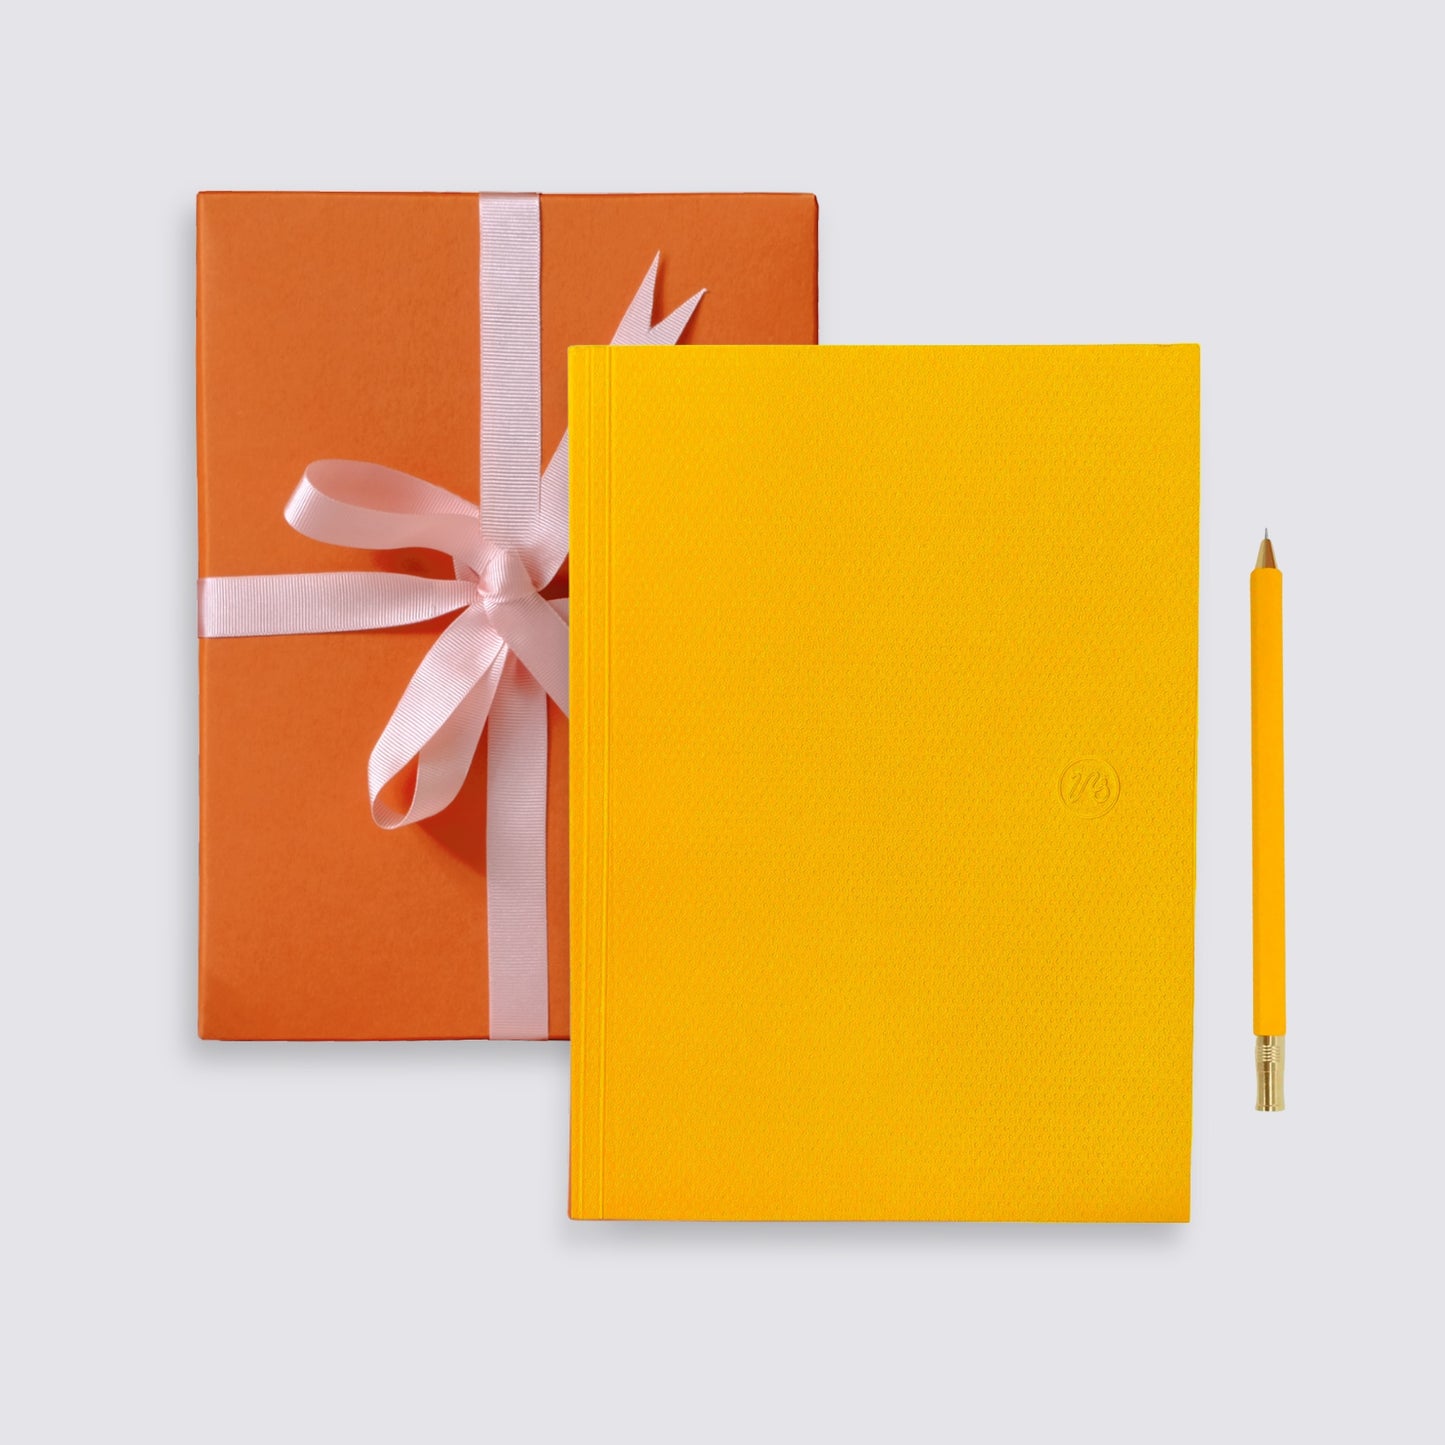 Yolk Notebook and Pen Duo - Everyday Pen / Dot Grid Paper